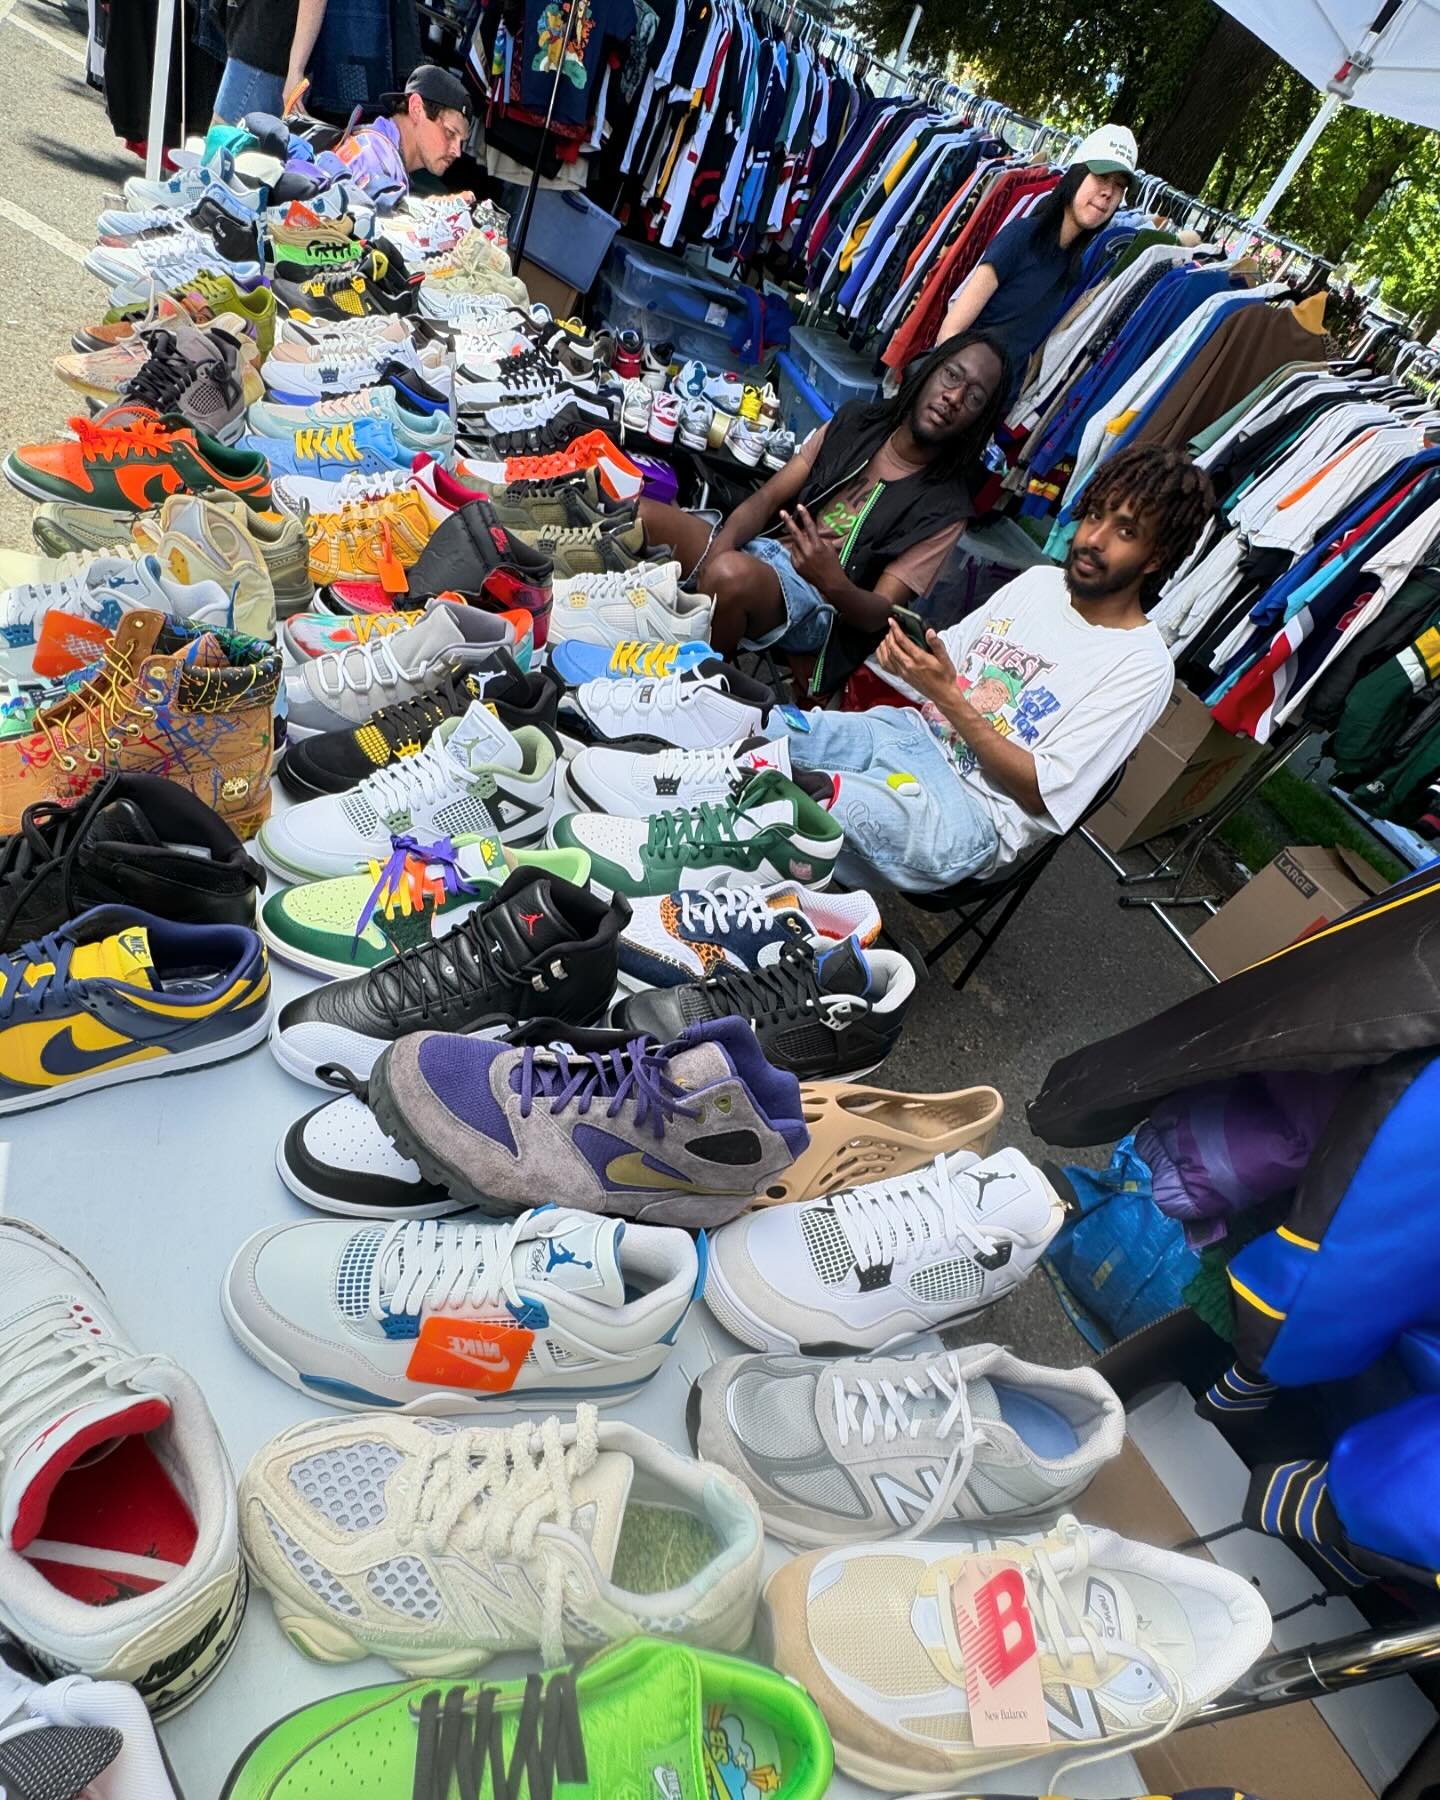 Sneakers and sports gear by @undisclosedexploration curbside! Come check out their selection. #fleamarket #shopsmall #seattlemade #seattlepopup #fremontsundaymarket #makersmarket